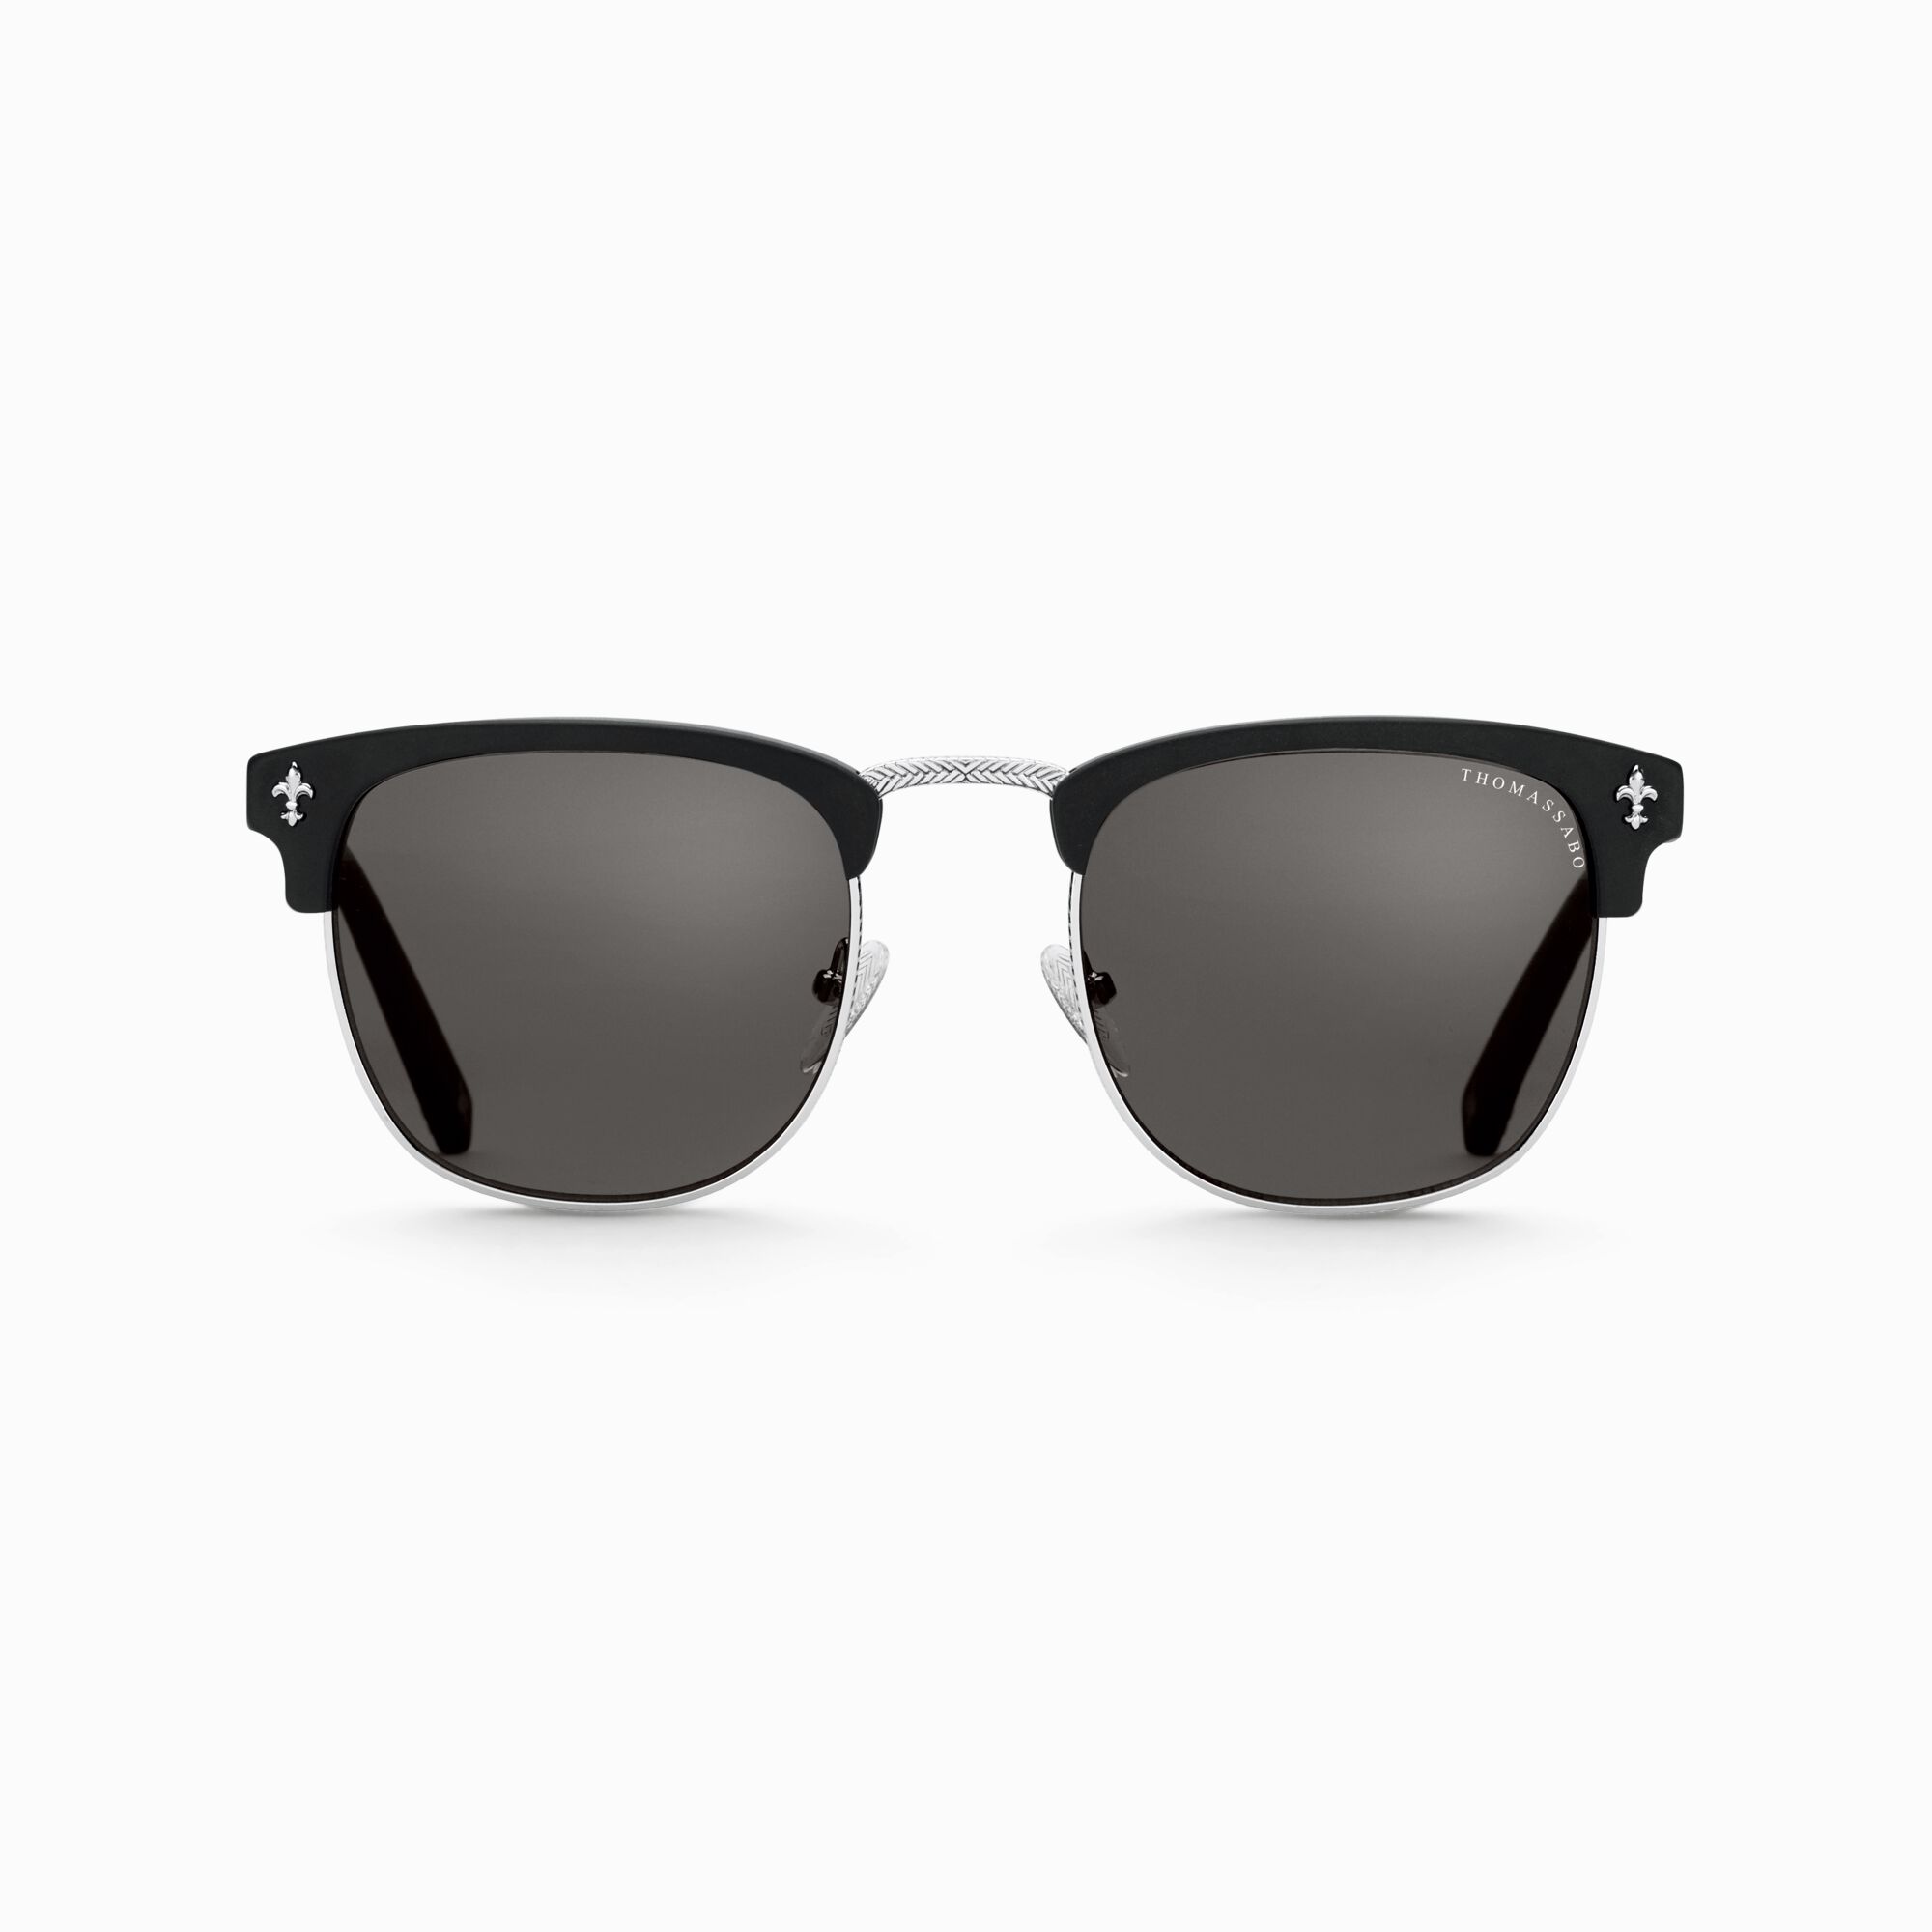 Sunglasses James trapeze lily polarised from the  collection in the THOMAS SABO online store